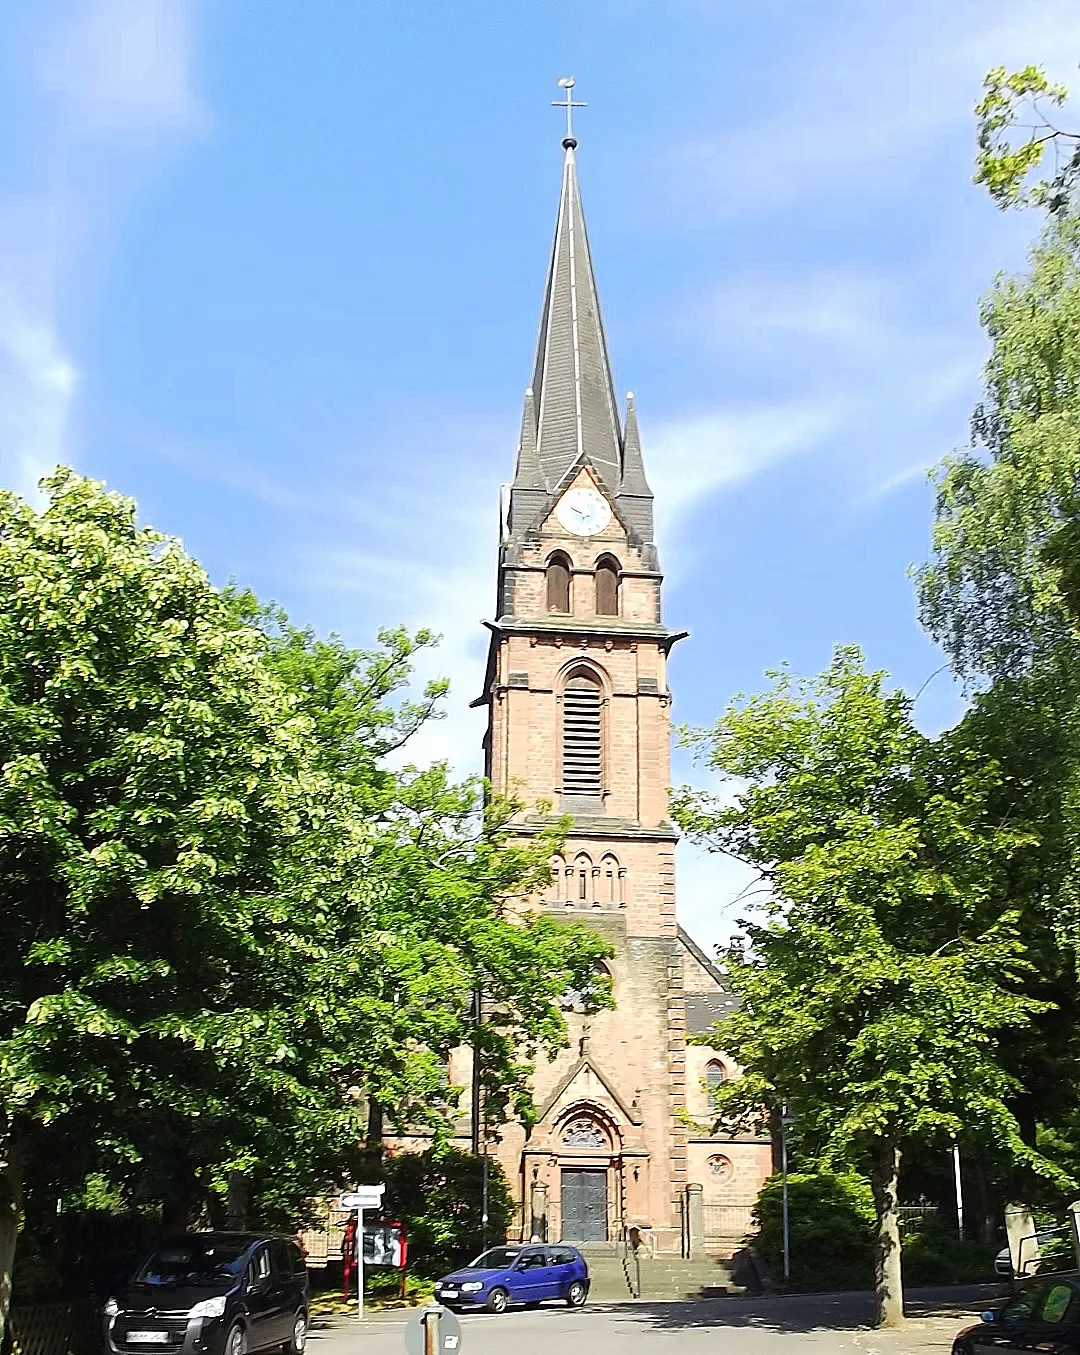 Image of Friedrichsthal